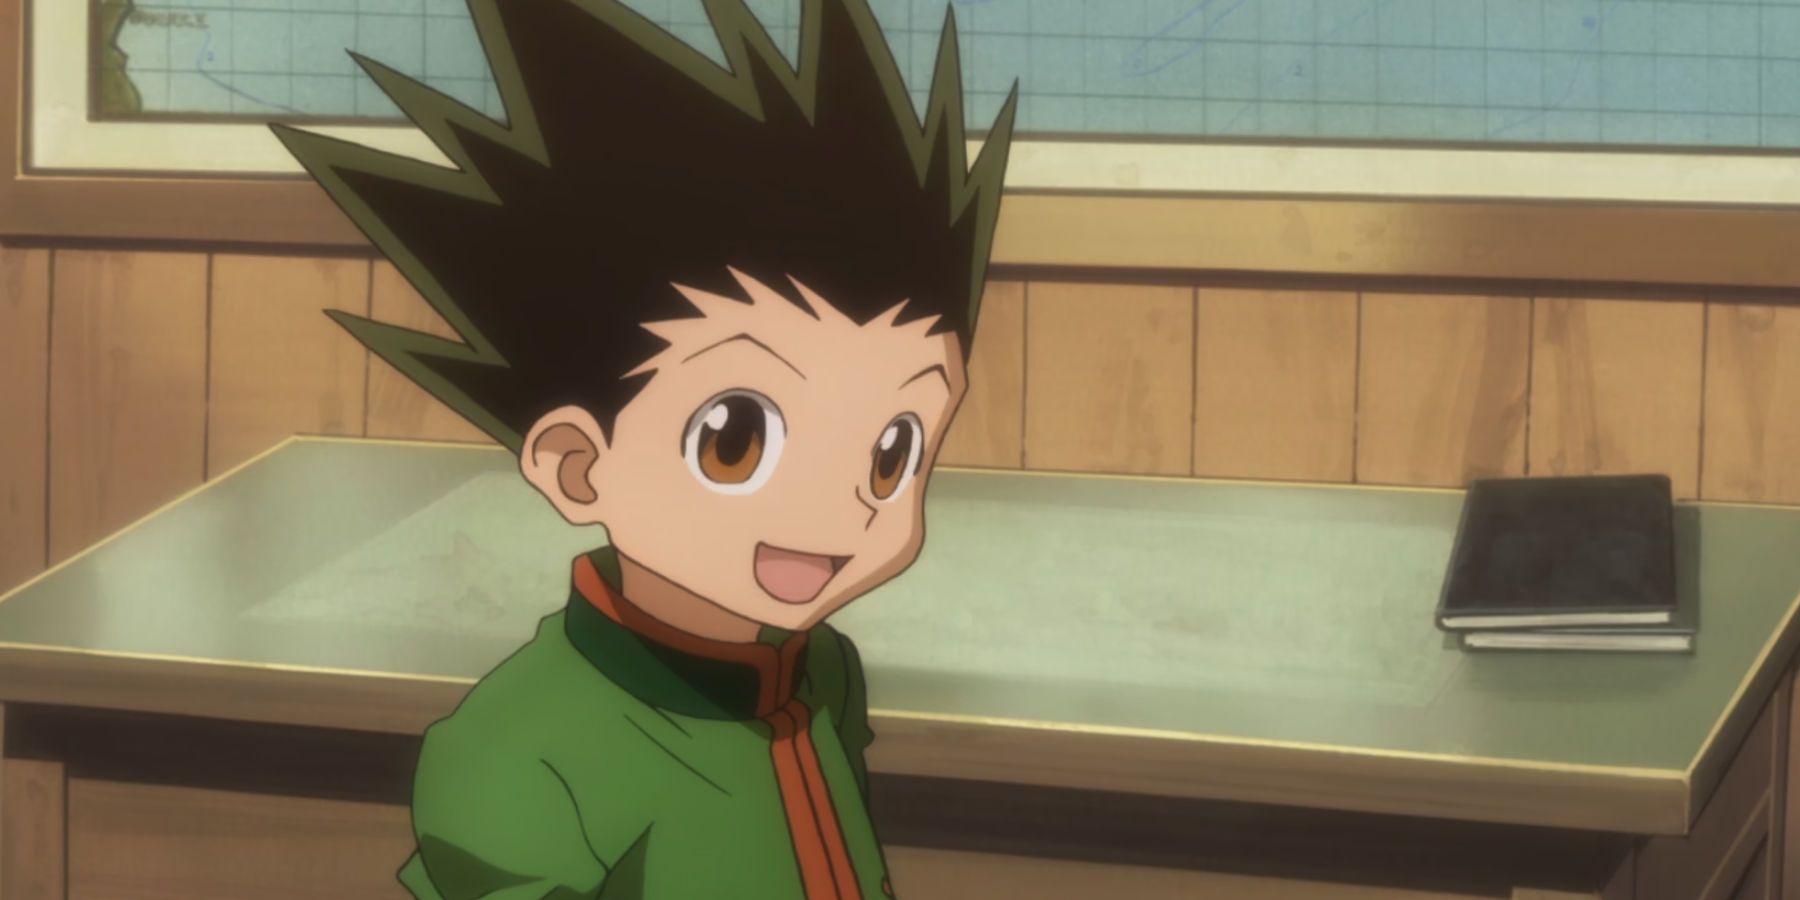 Gon Freecss in HxH